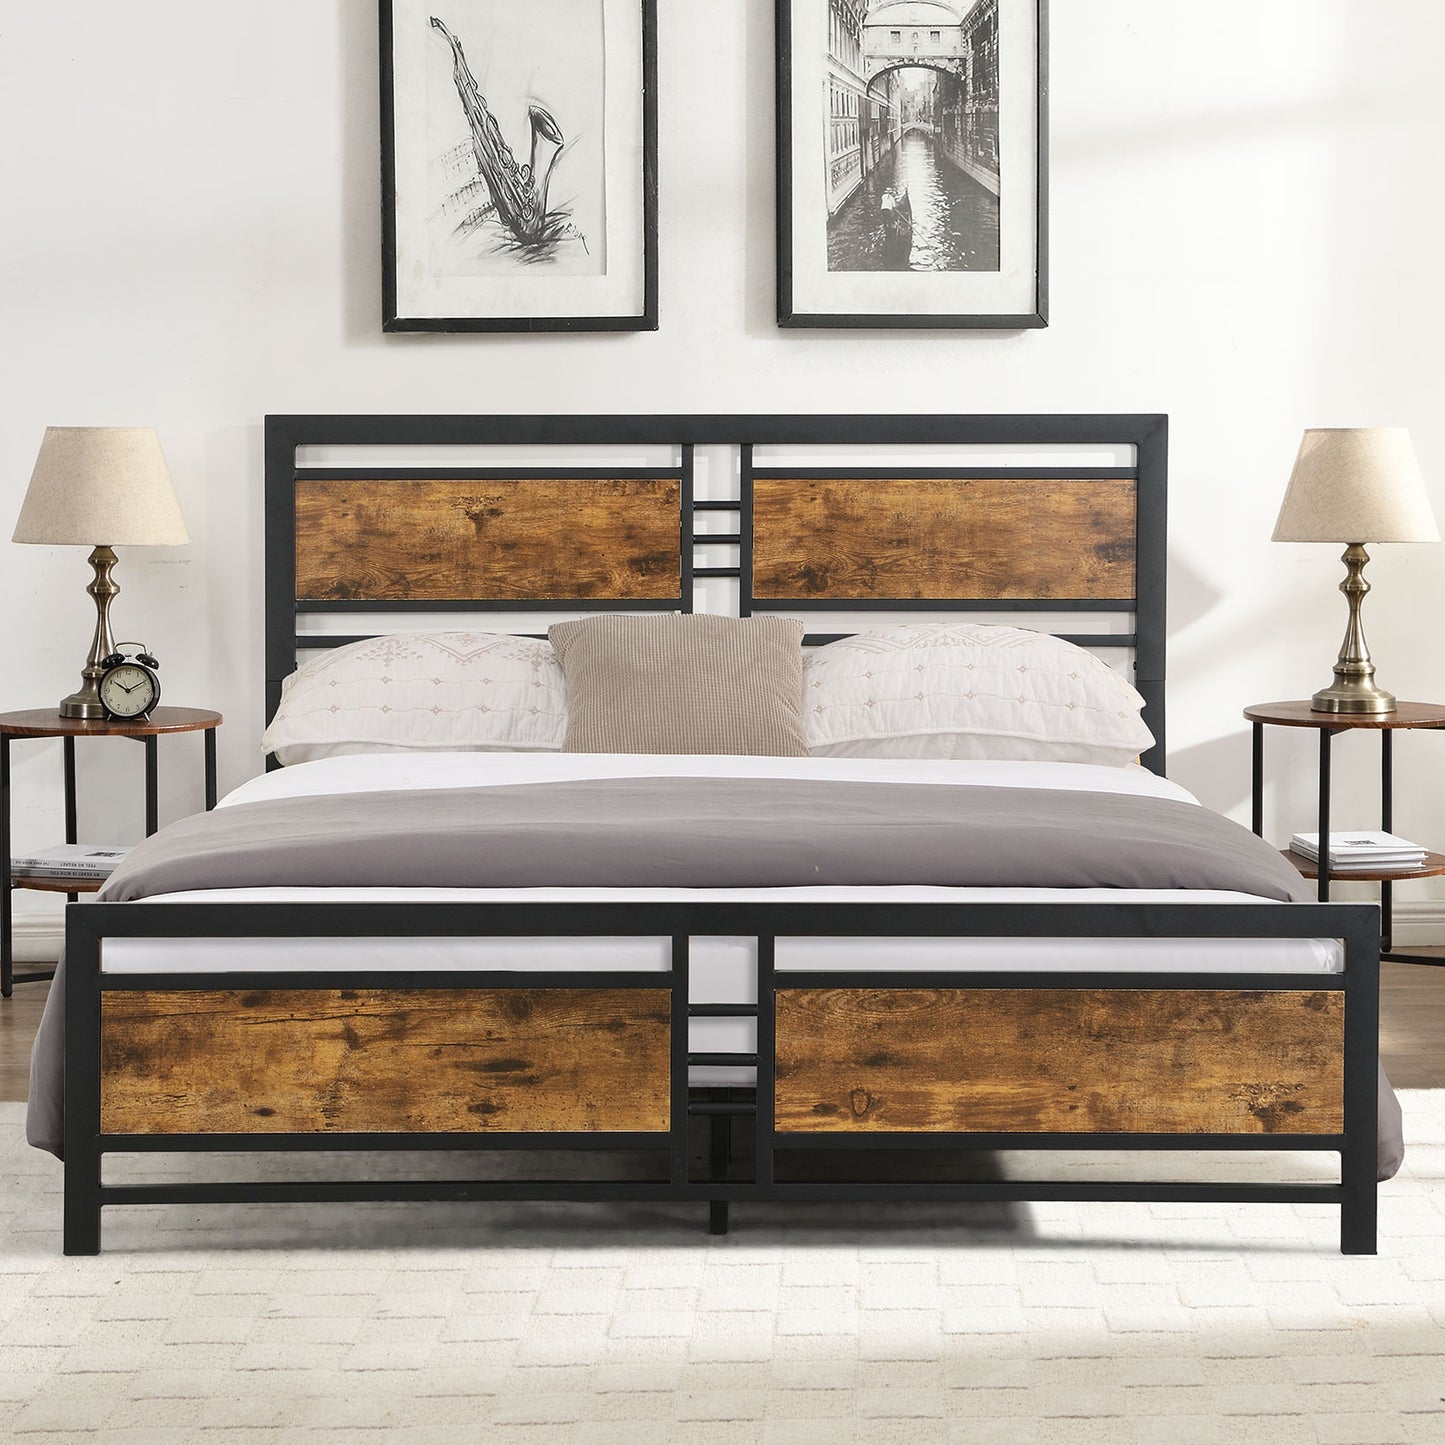 SYNGAR Black Full Size Bed Frame with Wooden Industrial Headboard and Footboard, Iron Platform Bed Frame Full Metal Bed Bedroom Furniture with 1100LBS Capacity, No Box Spring Needed, Noise Free